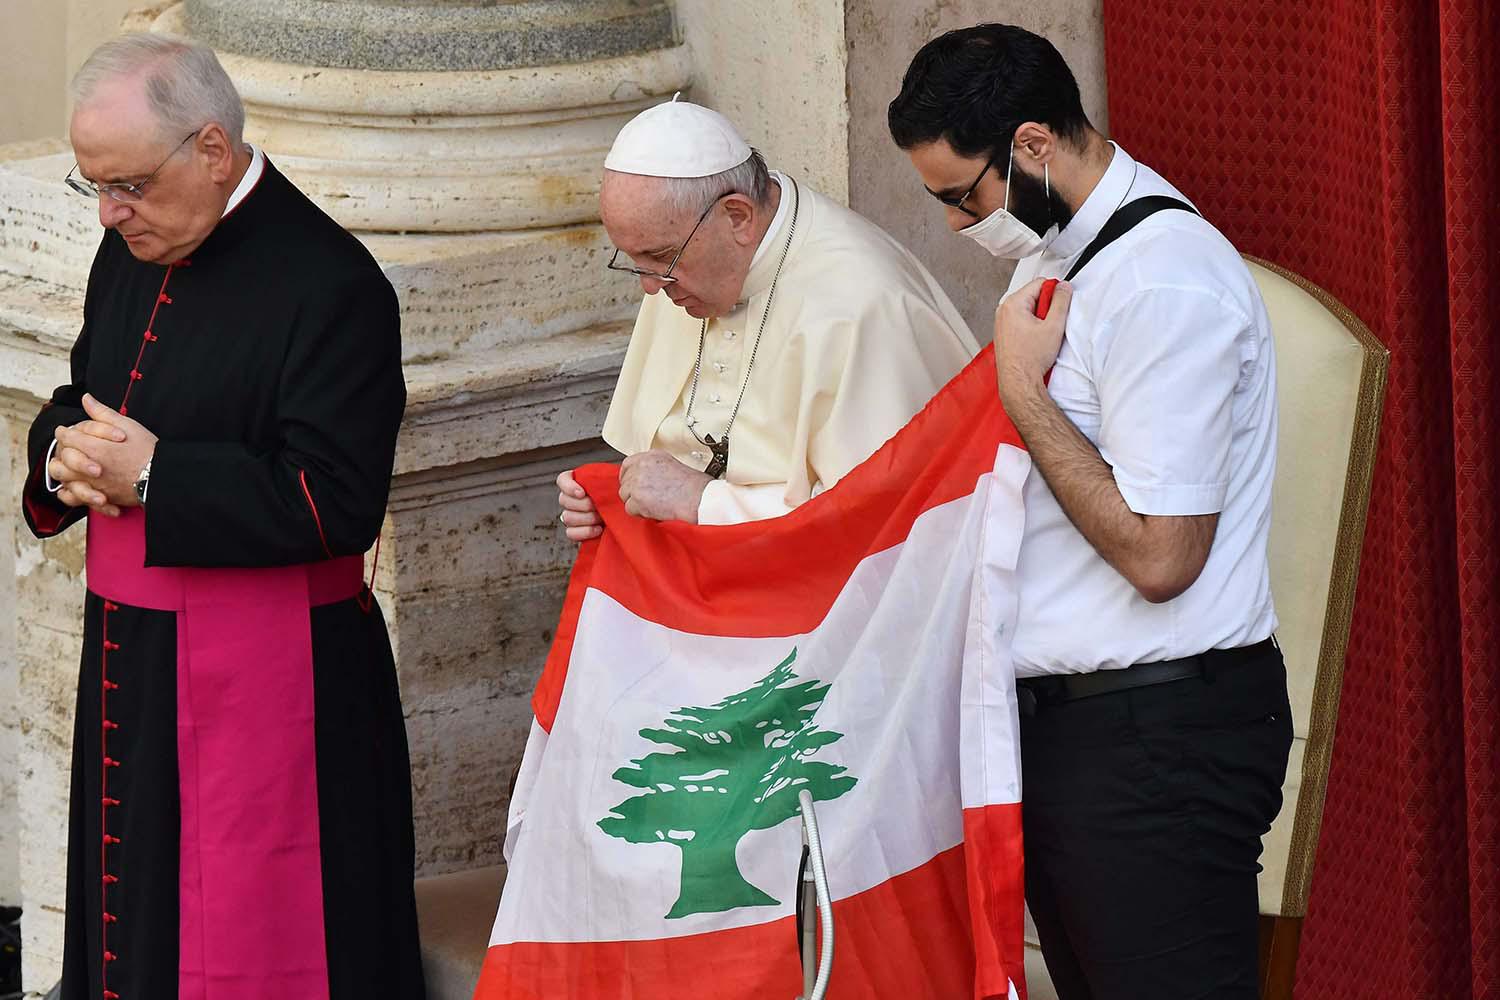 Pope Francis expresses his closeness to the Lebanese people